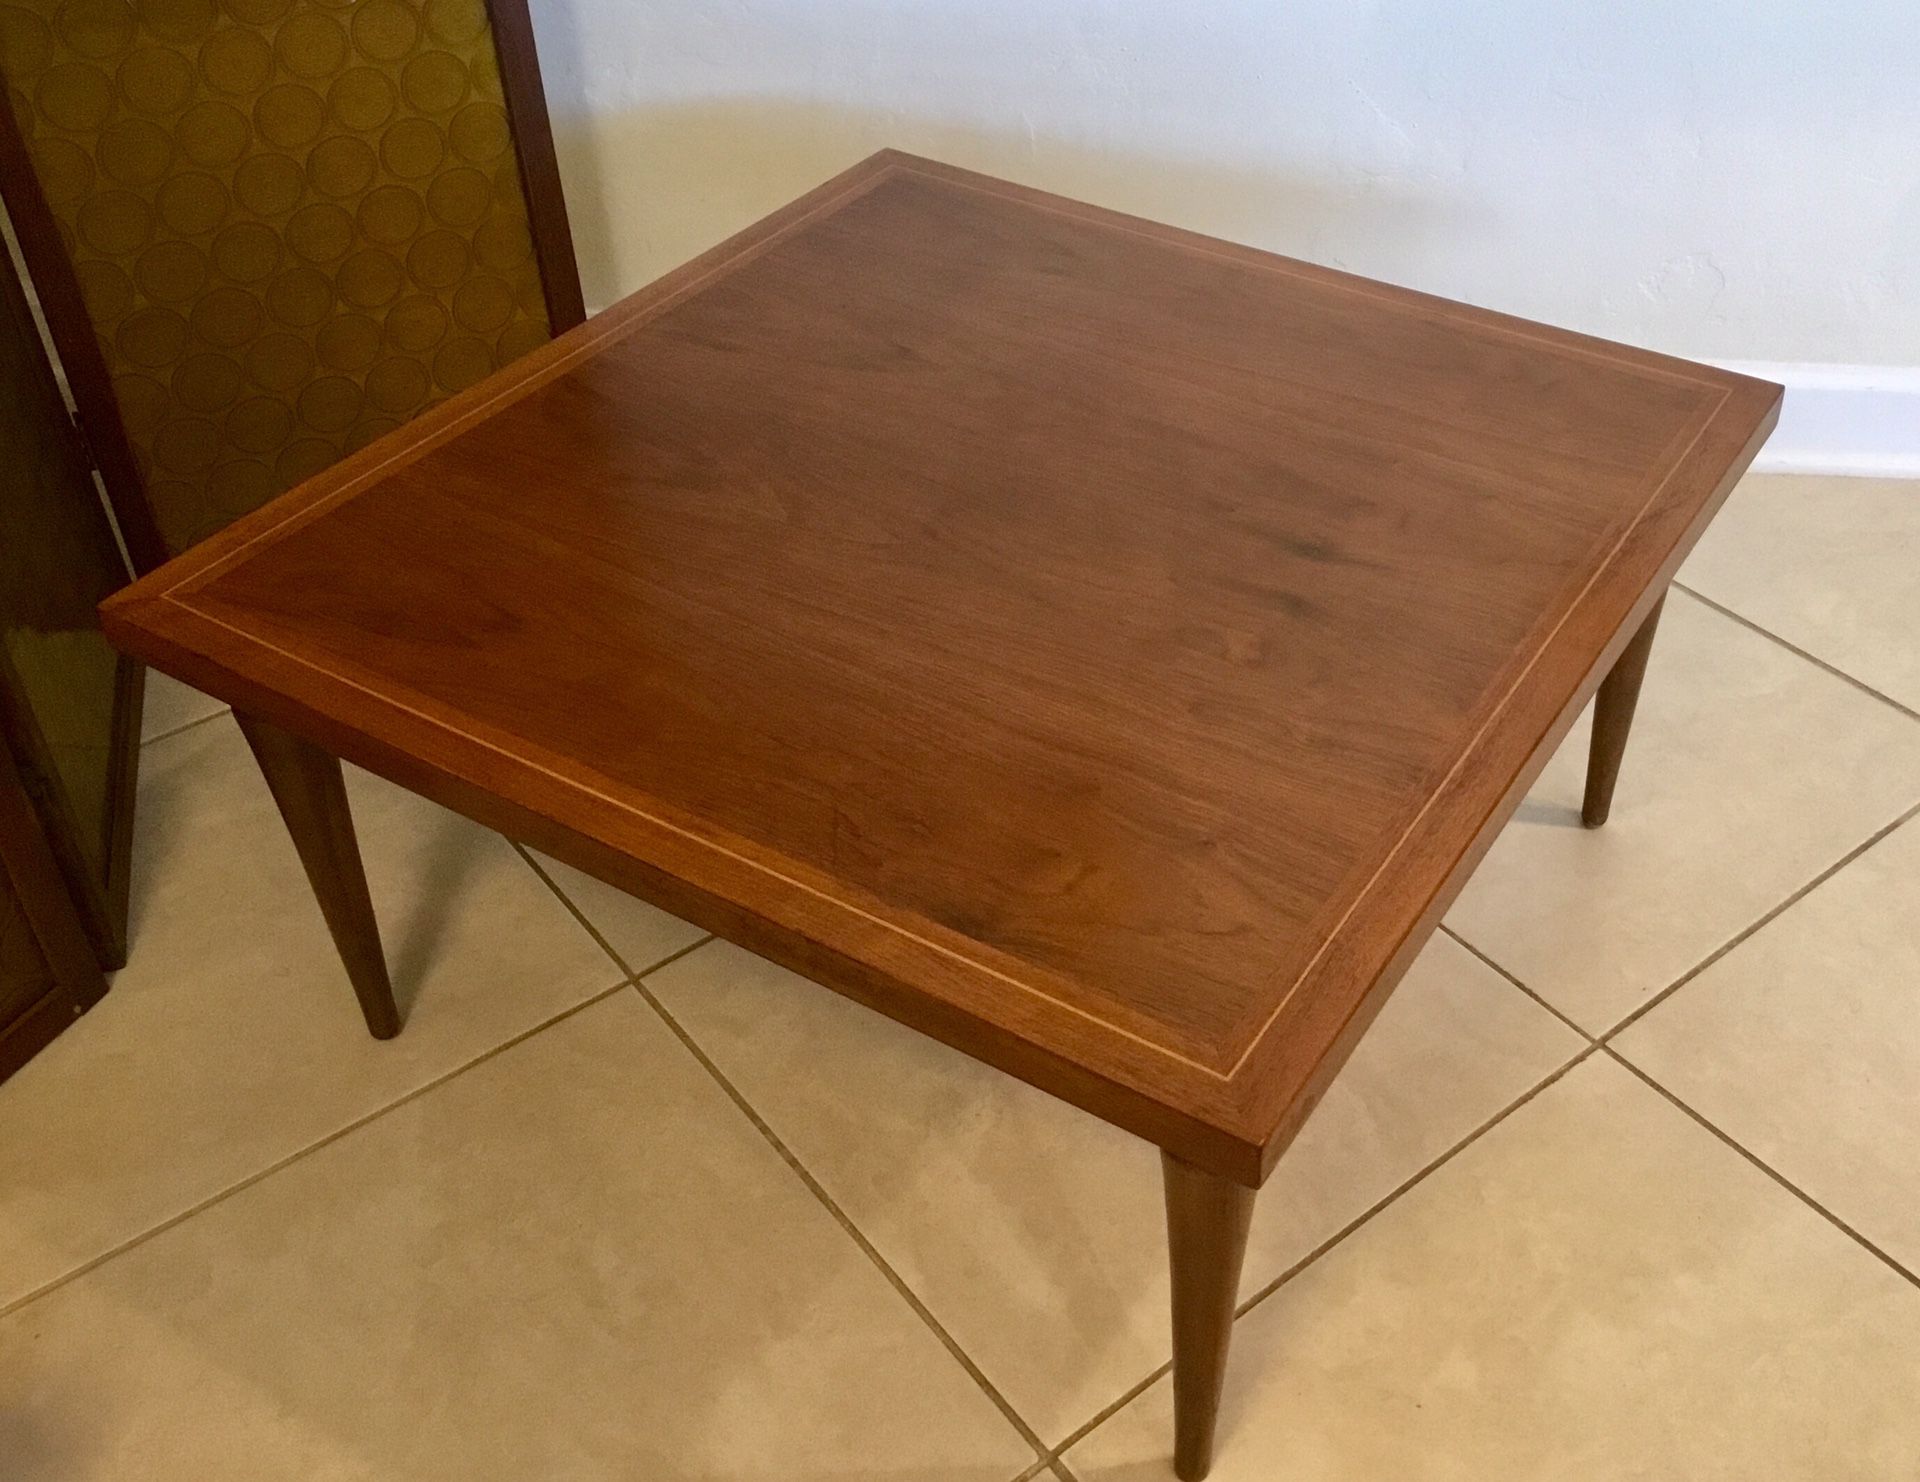 Beautiful Mid-Century Walnut Coffee Table With Inlaid Detailing and Sculptured Legs